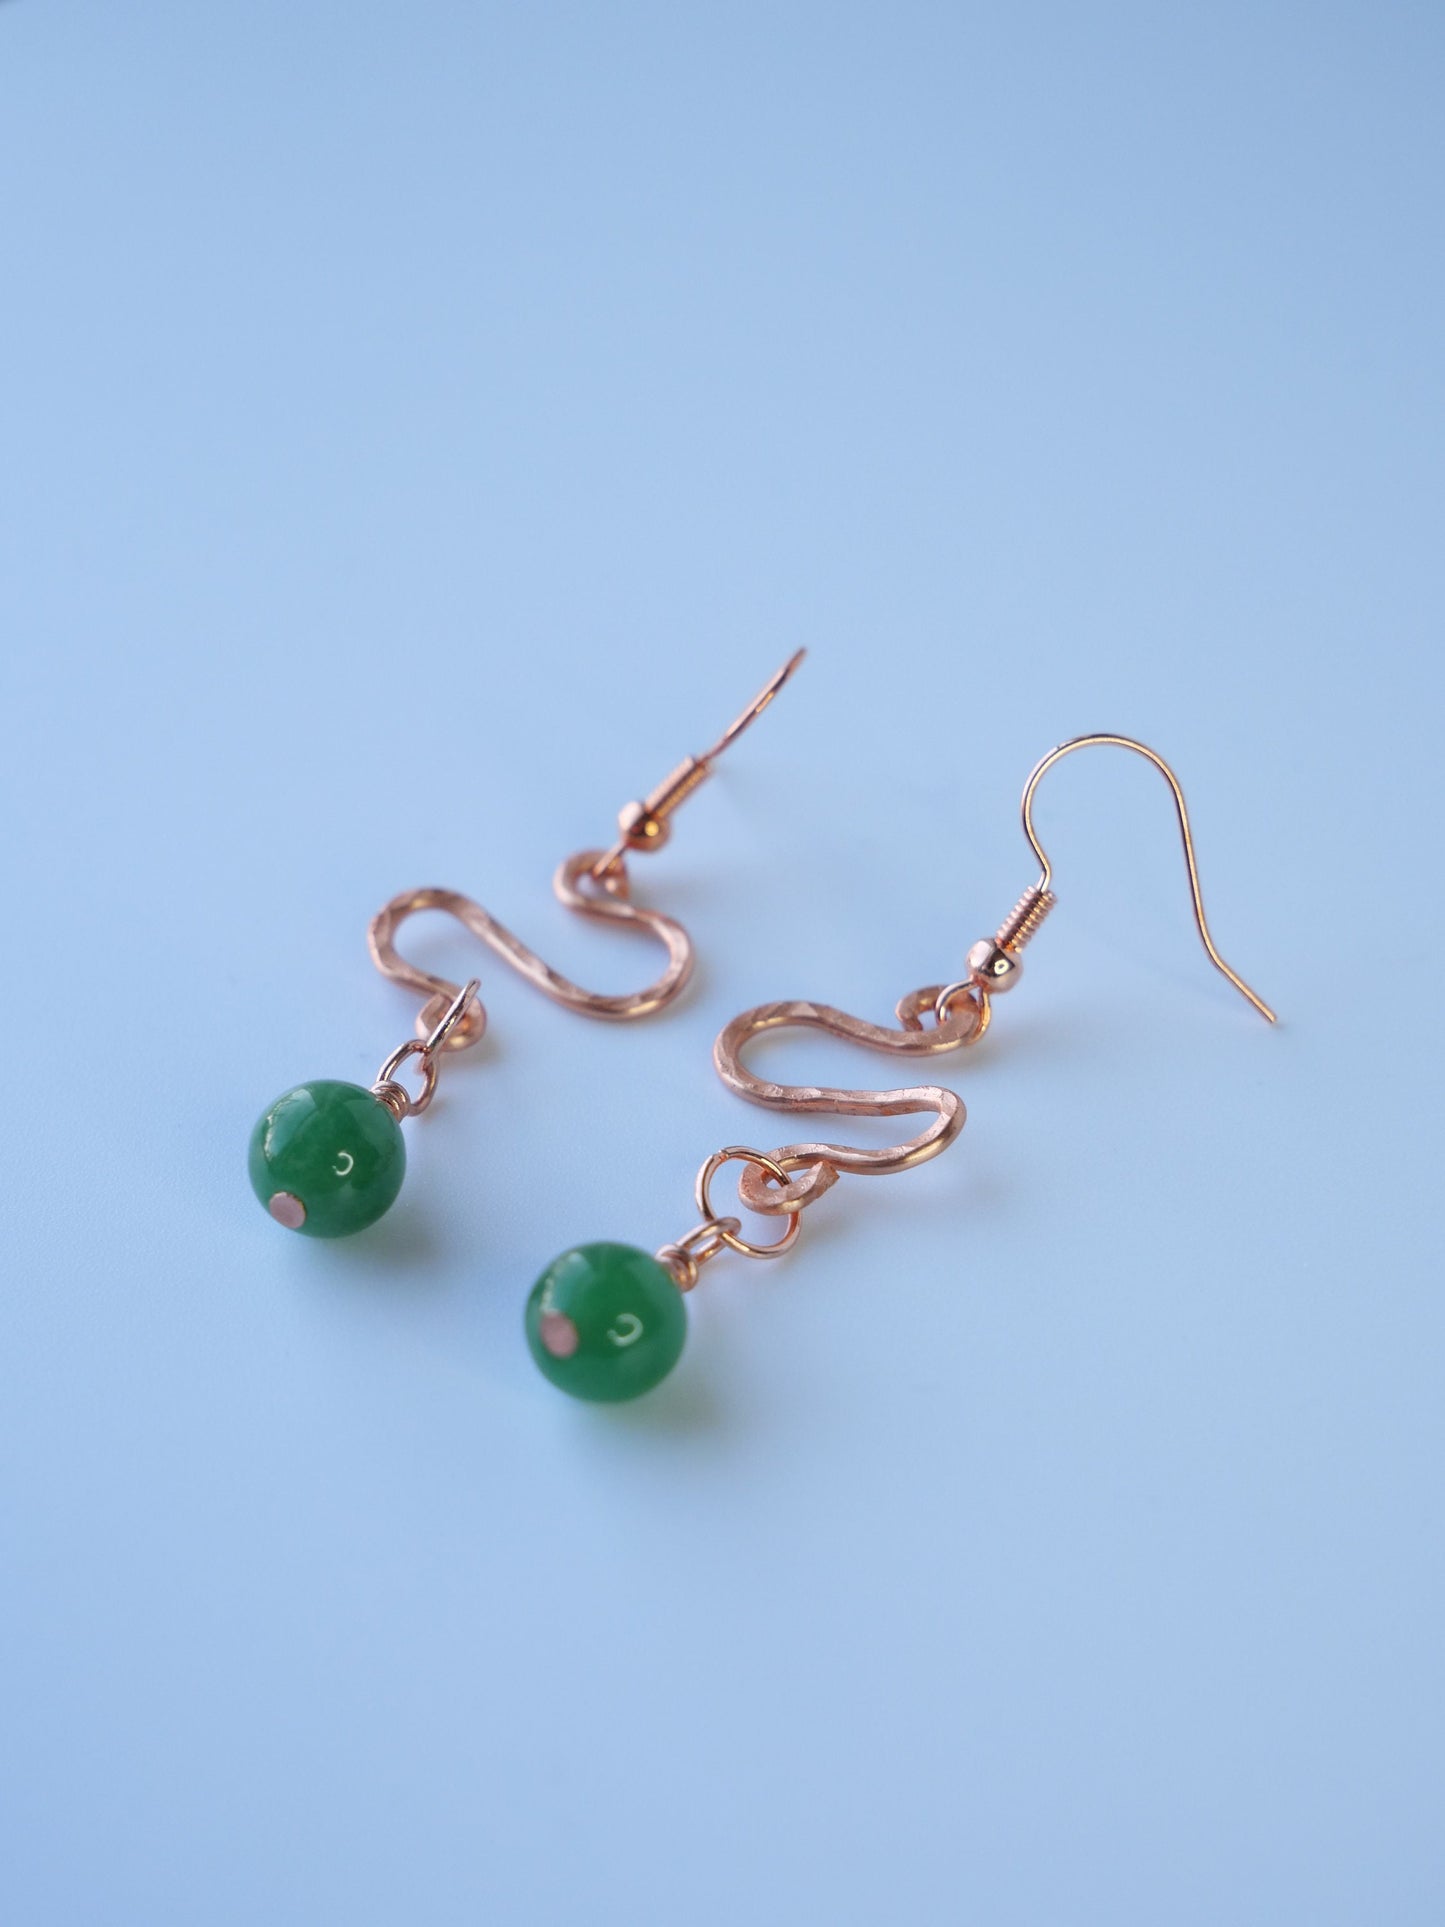 Copper and green jade bead earrings, Copper Snake Earrings, Hand Made Earrings. Made in Maine